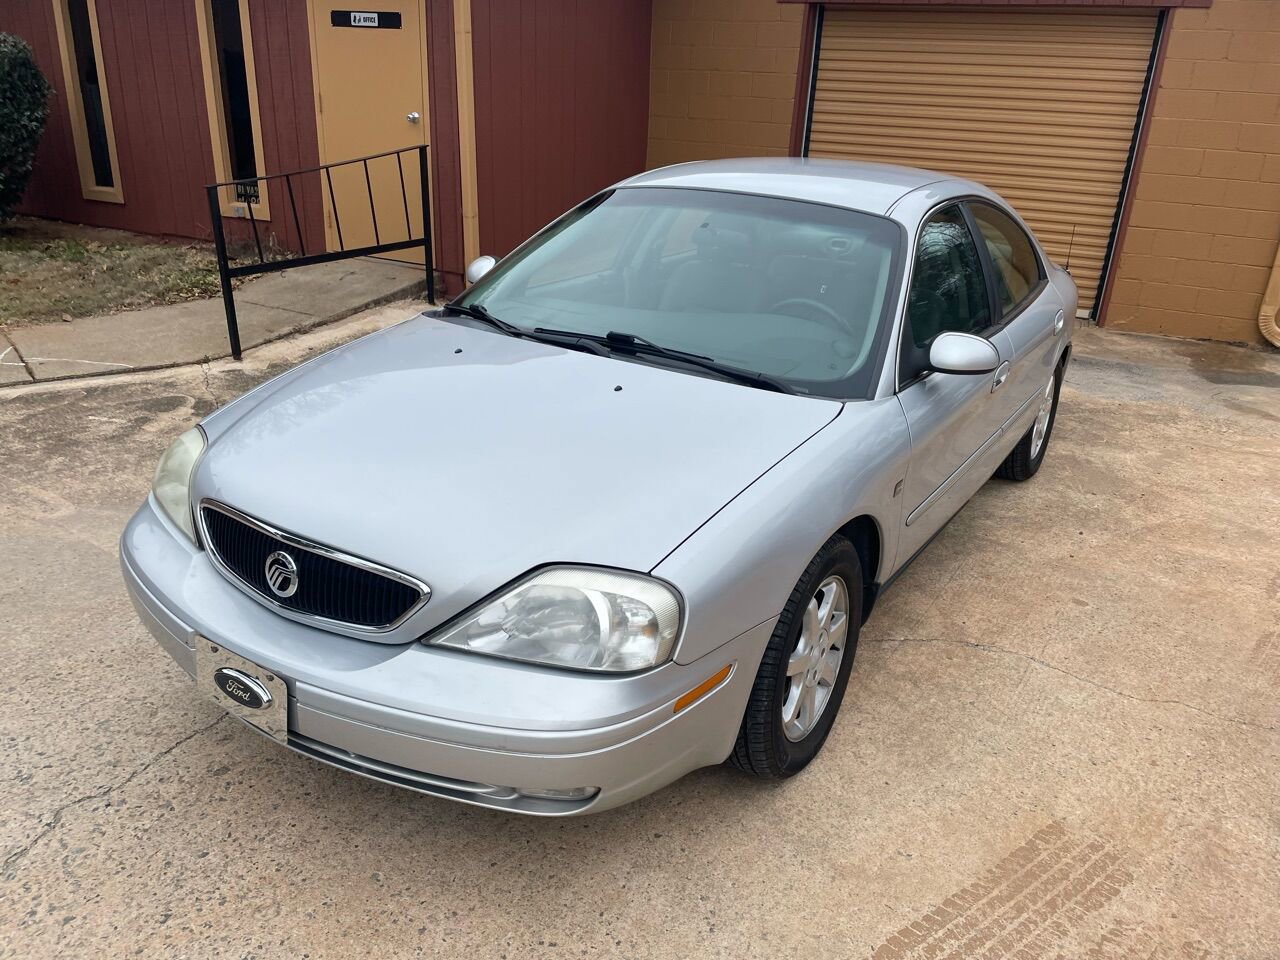 Used 2001 Mercury Sable for Sale Right Now - Autotrader